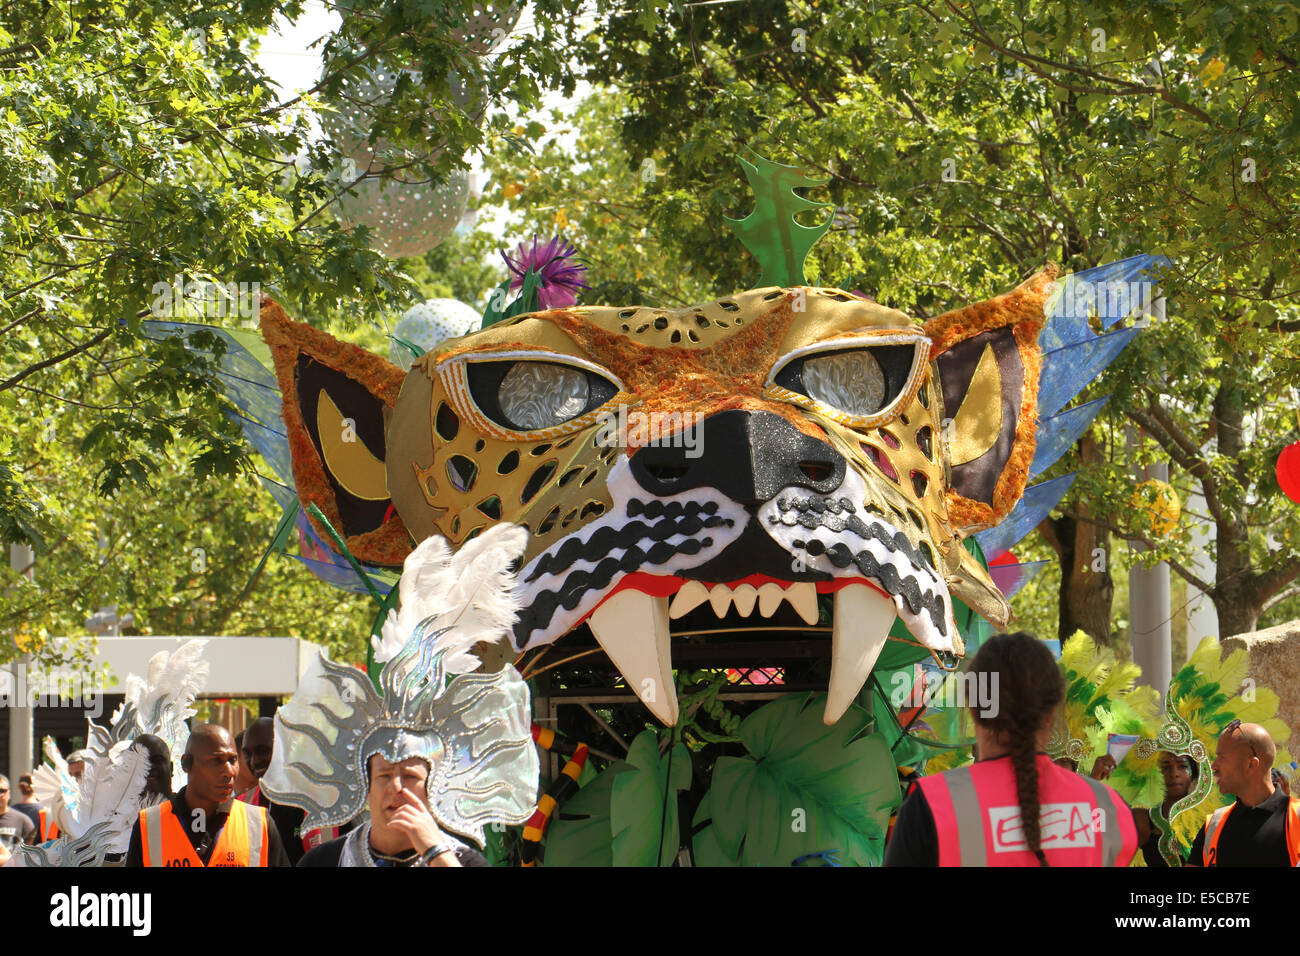 London, UK. 27 July 2014. A carnival float makes it way around the Queen Elizabeth Park in Newham. Credit: David Mbiyu/ Alamy Live News Stock Photo